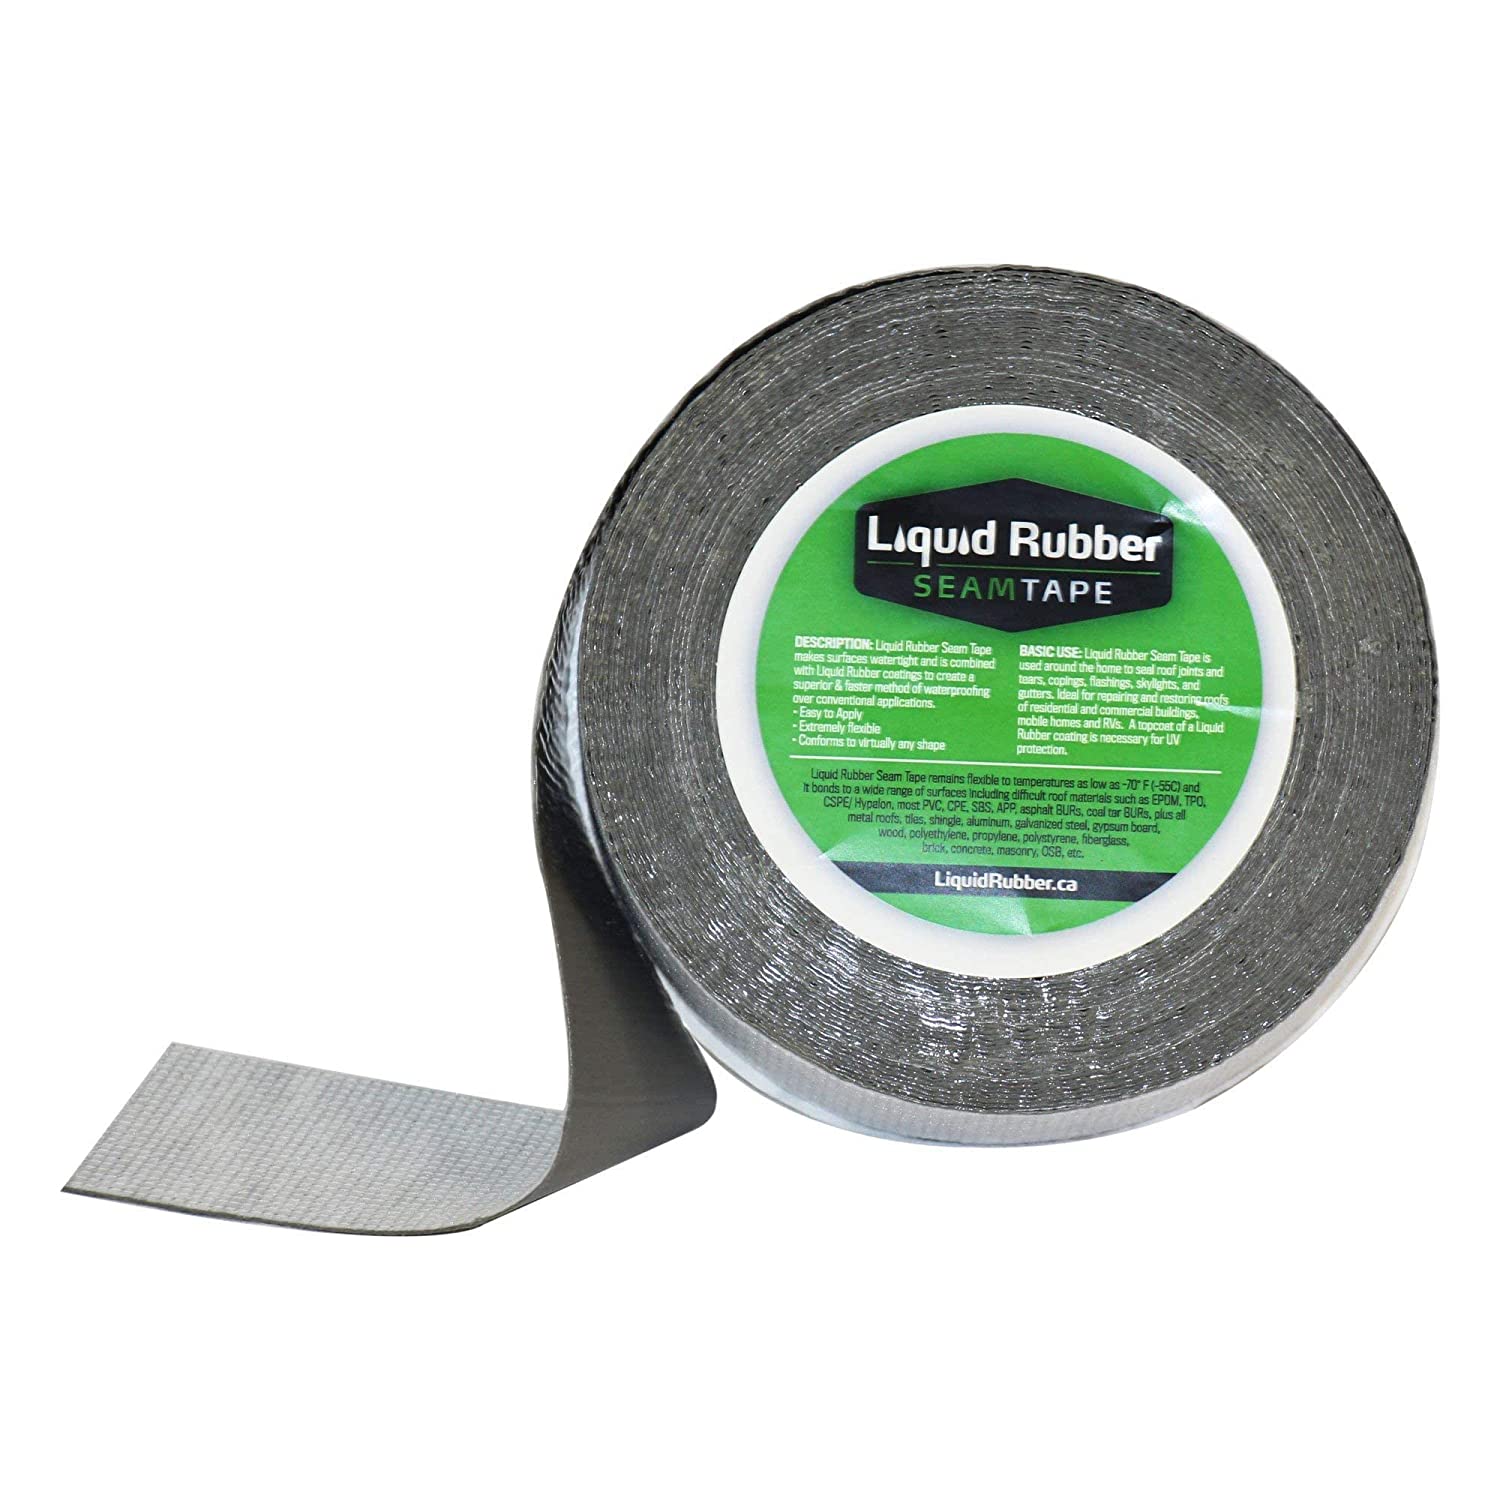 Liquid Rubber Peel and Stick Seam Tape - Solar Submersible Well Pumps